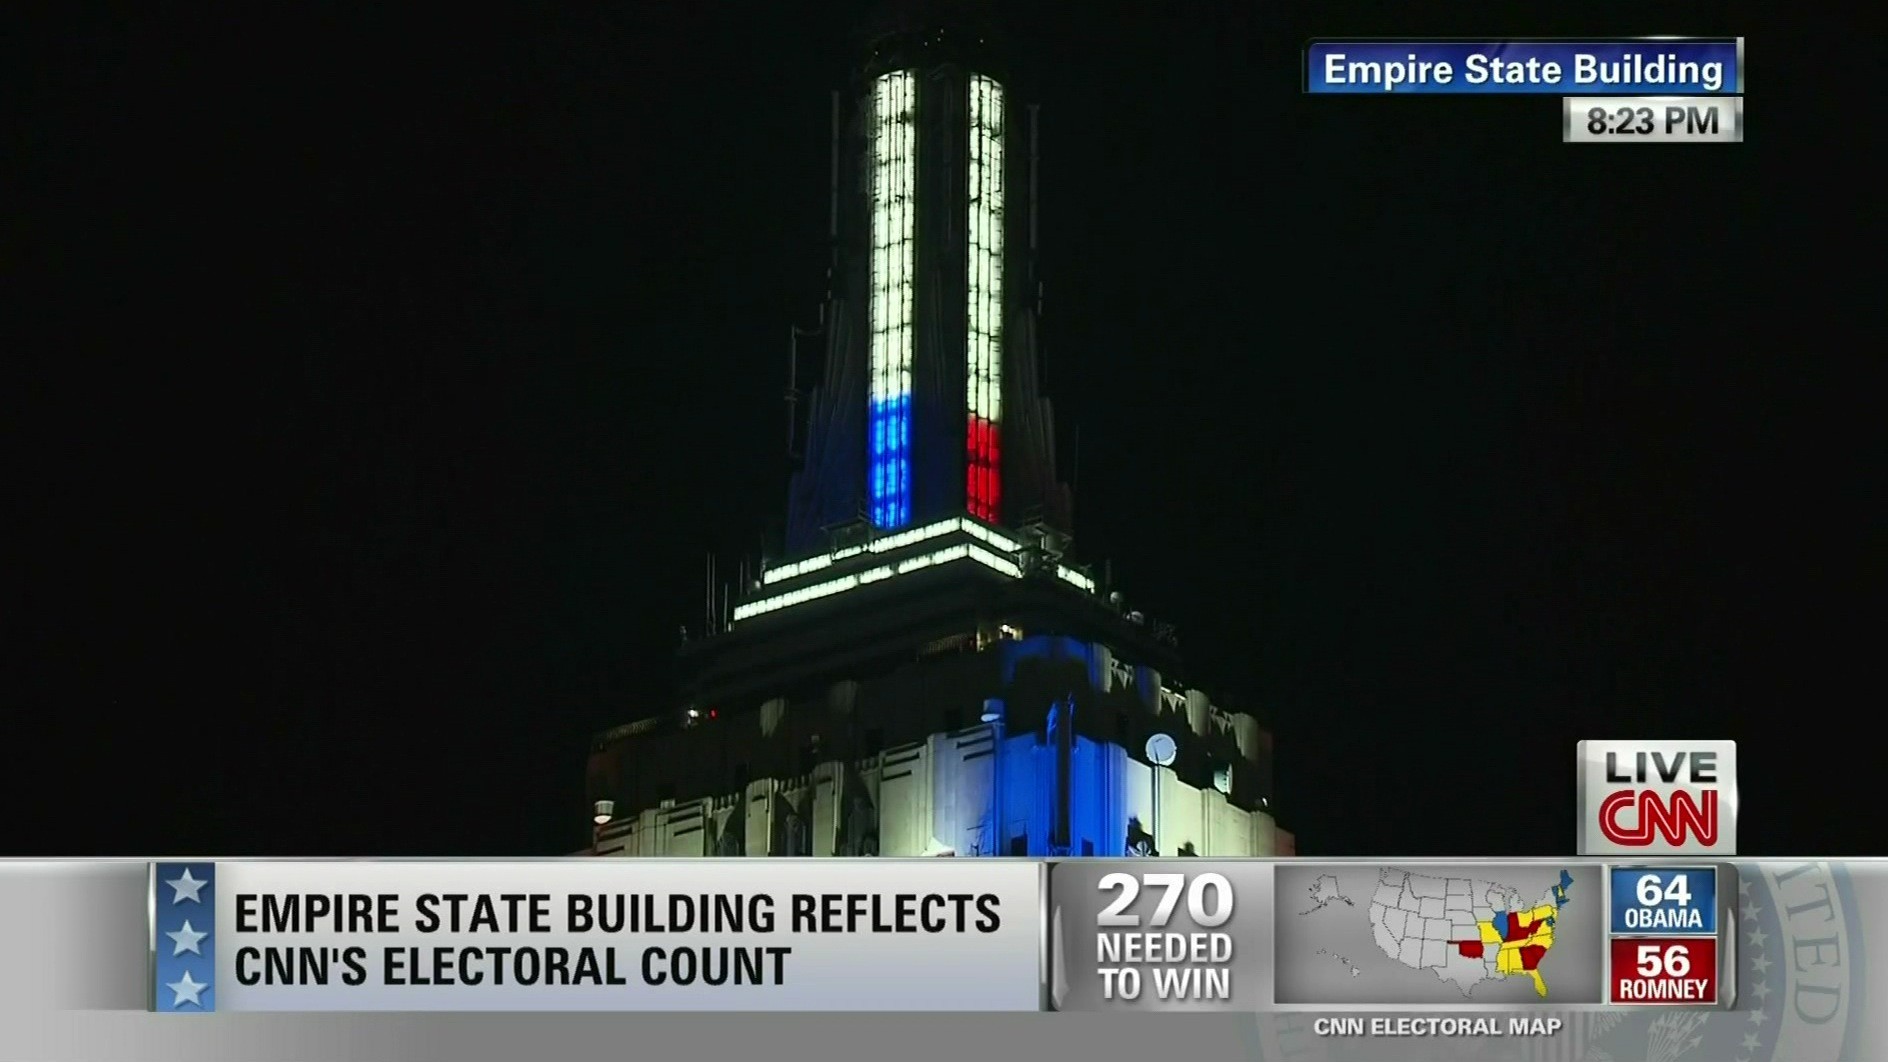 CNN Lights Up Empire State Building With Election Results (VIDEO, PHOTOS) | HuffPost